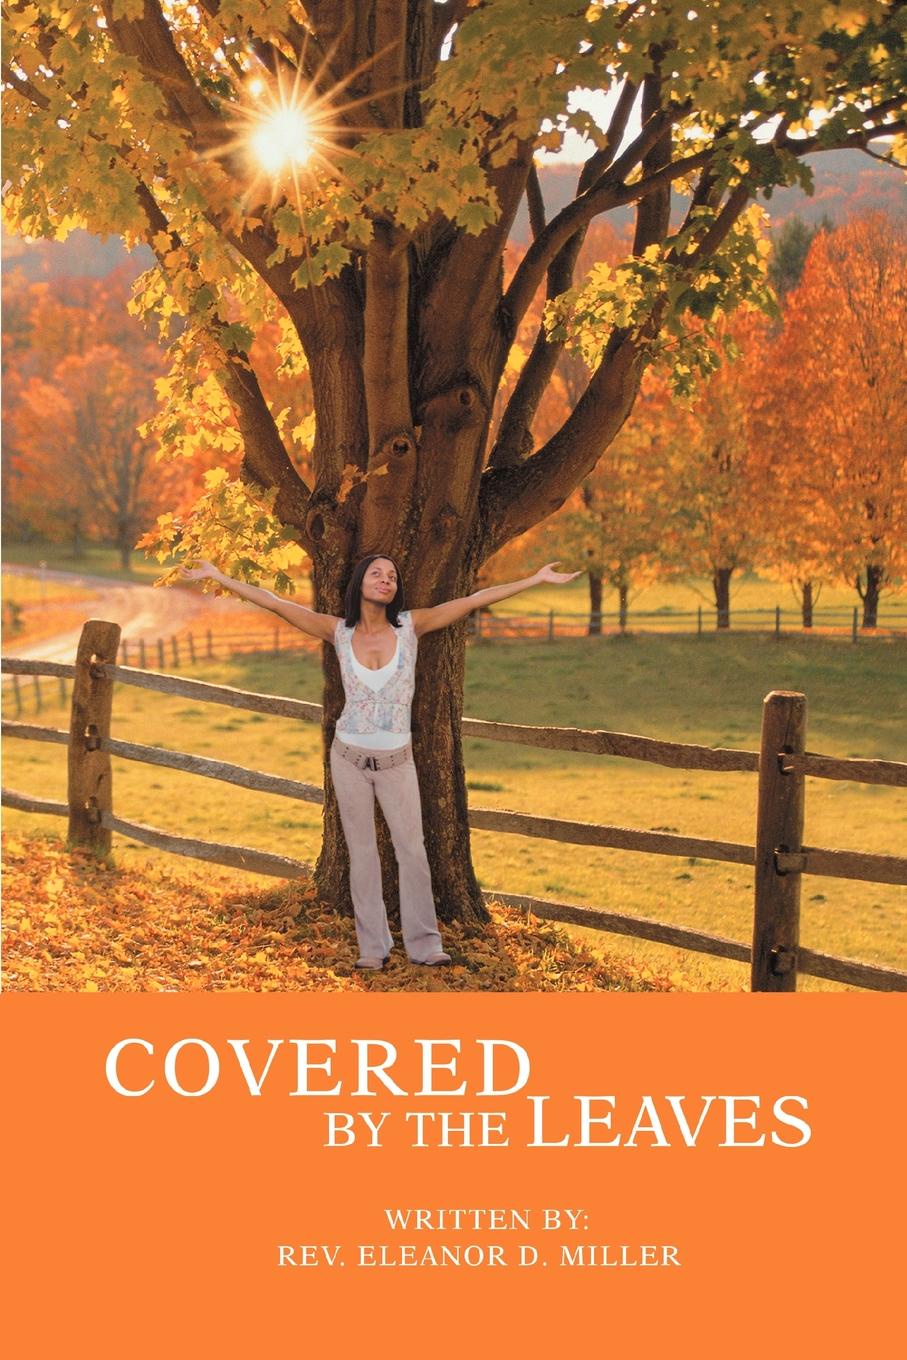 Covered by the Leaves